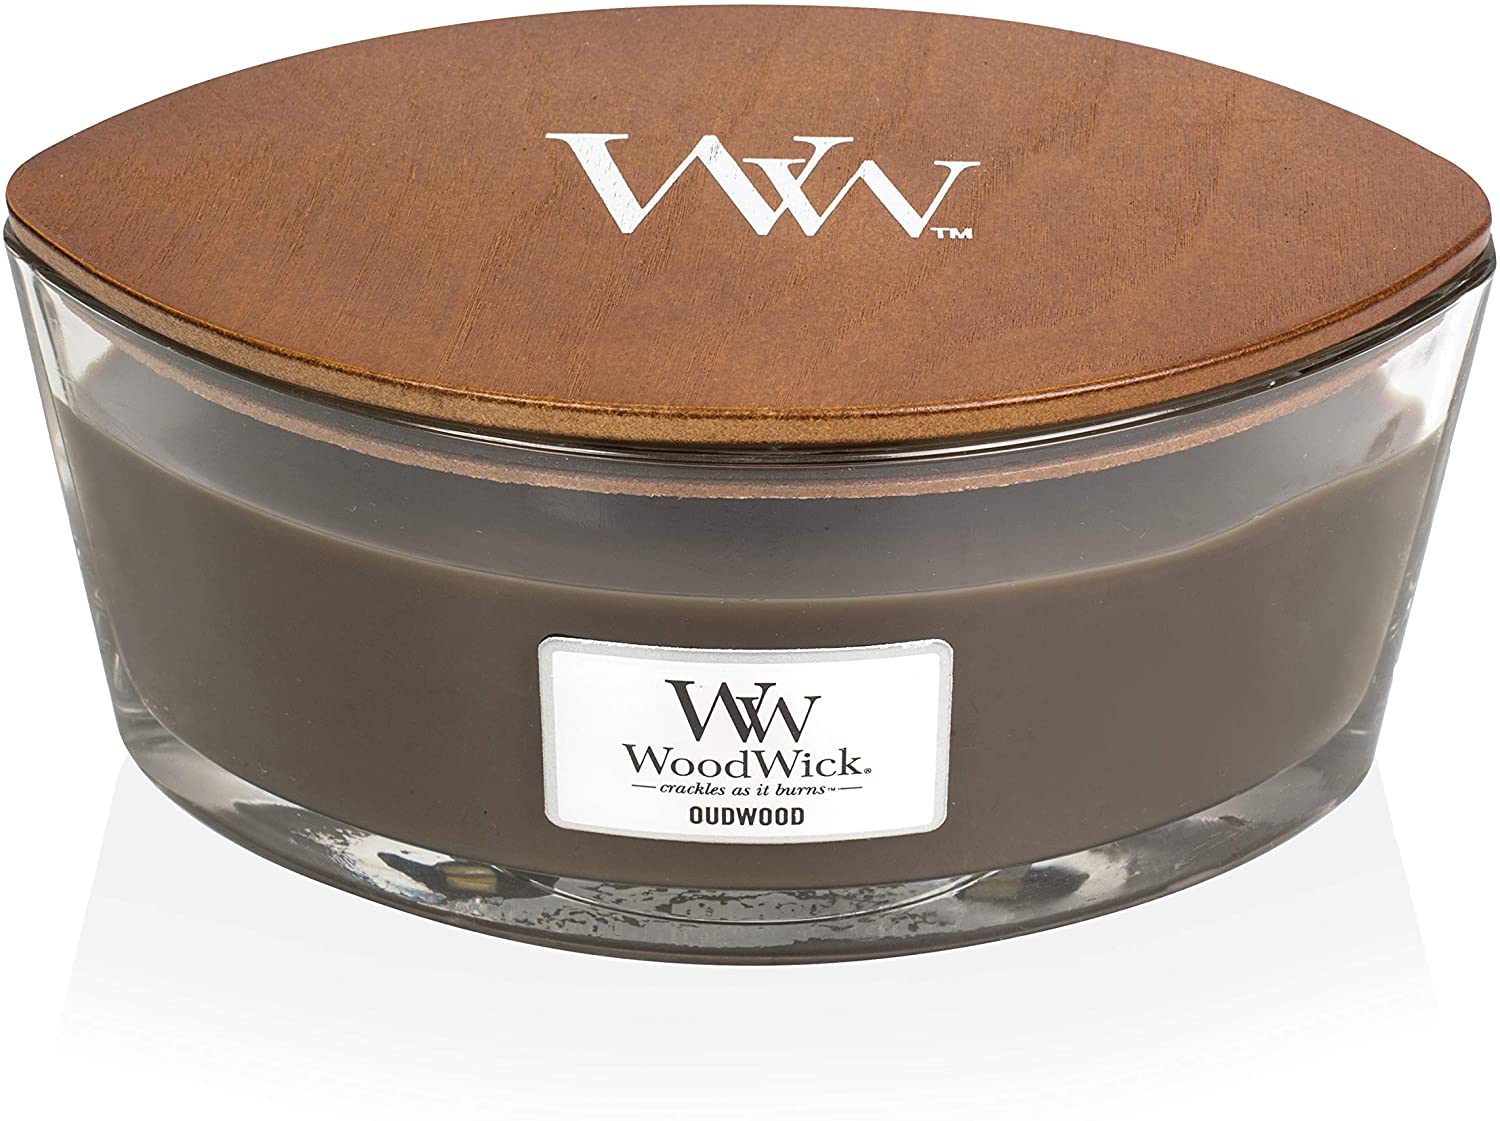 Woodwick Elliptical Scented Candle With Crackling Wick